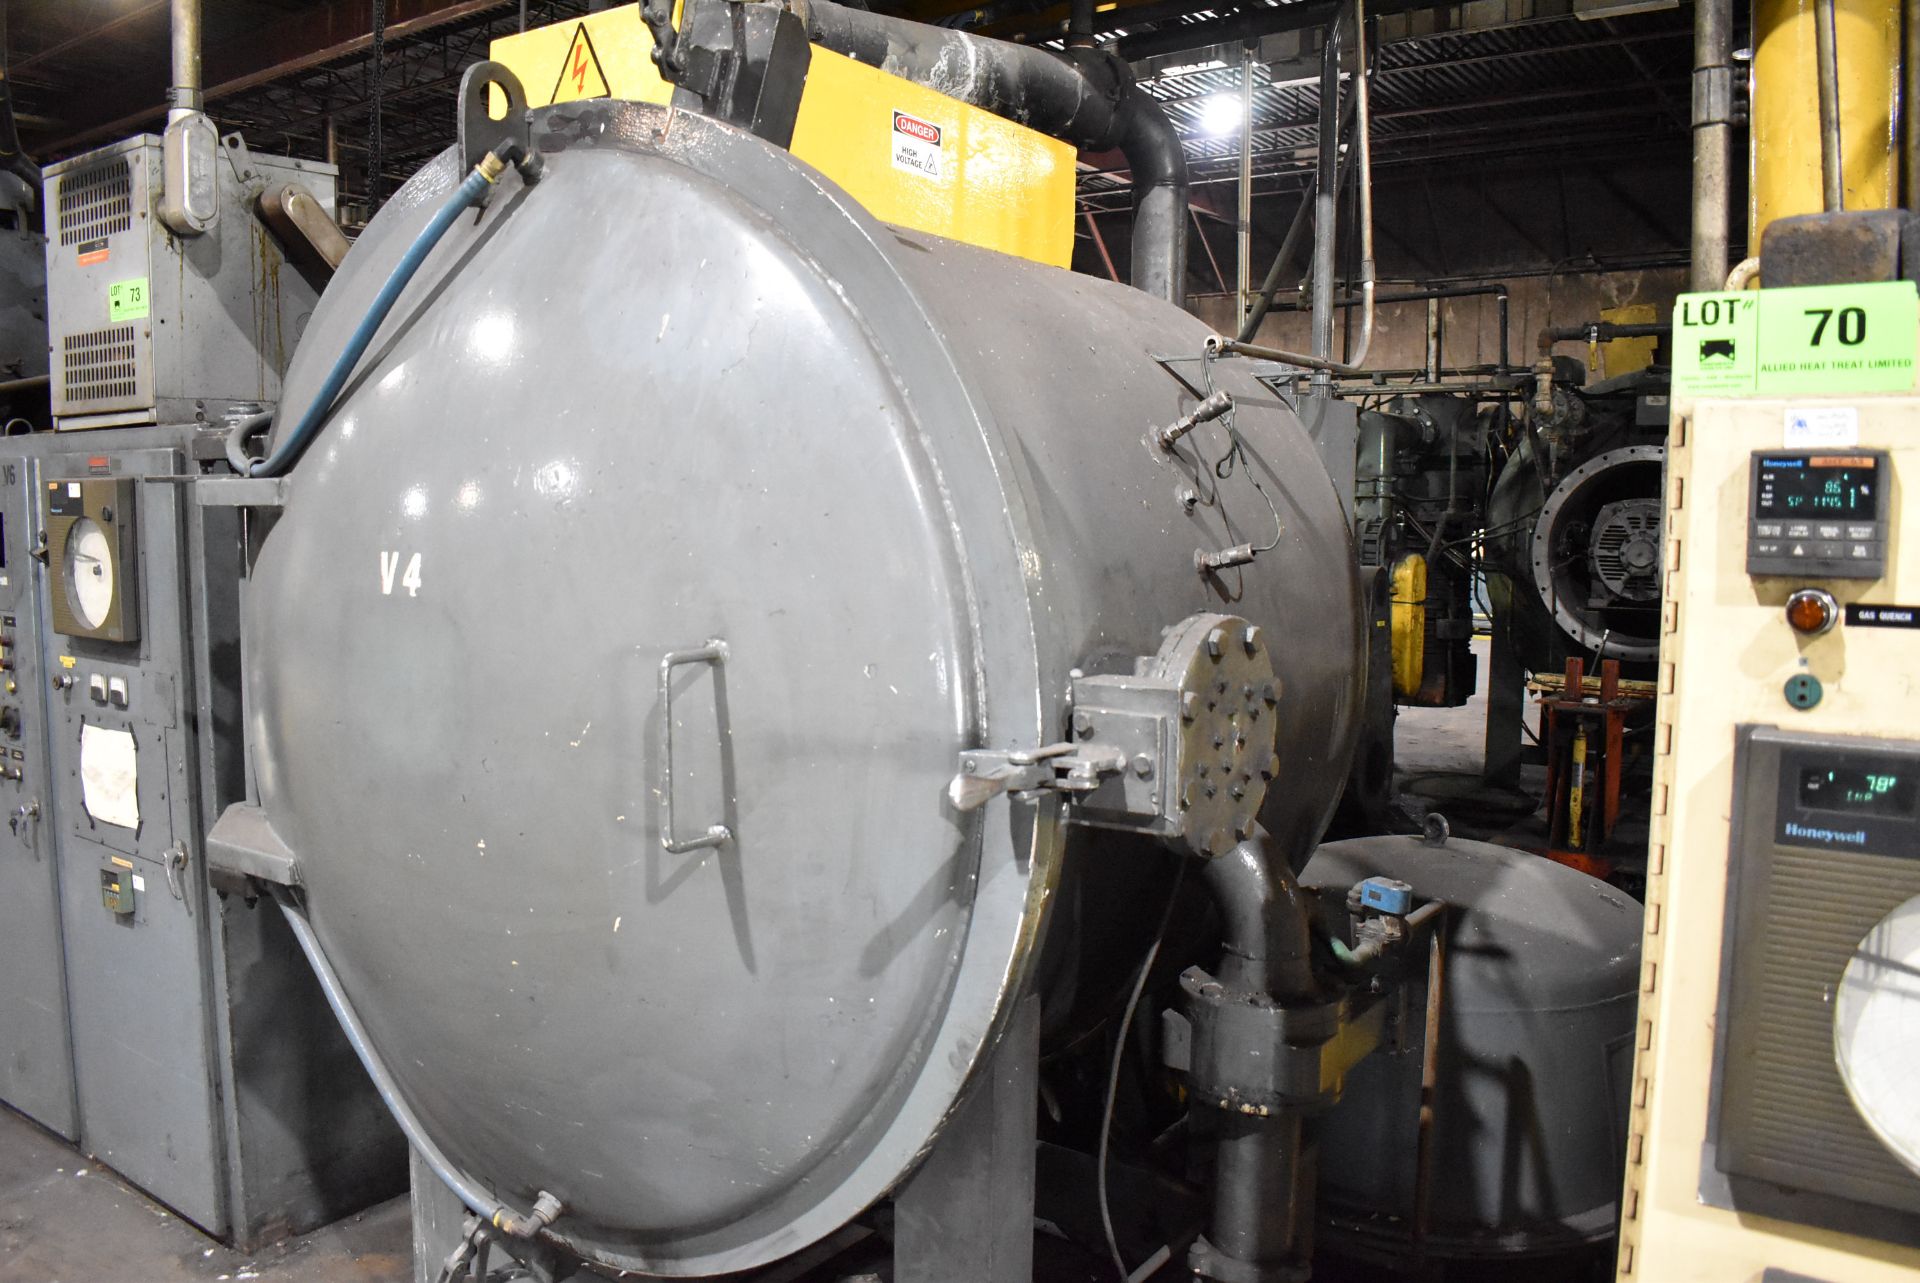 ABAR HR 34-T ELECTRIC VACUUM FURNACE WITH 1500 DEGREES F MAX TEMP, 24"Wx24"Hx36"D APPROX SIZE, 1, - Image 6 of 14